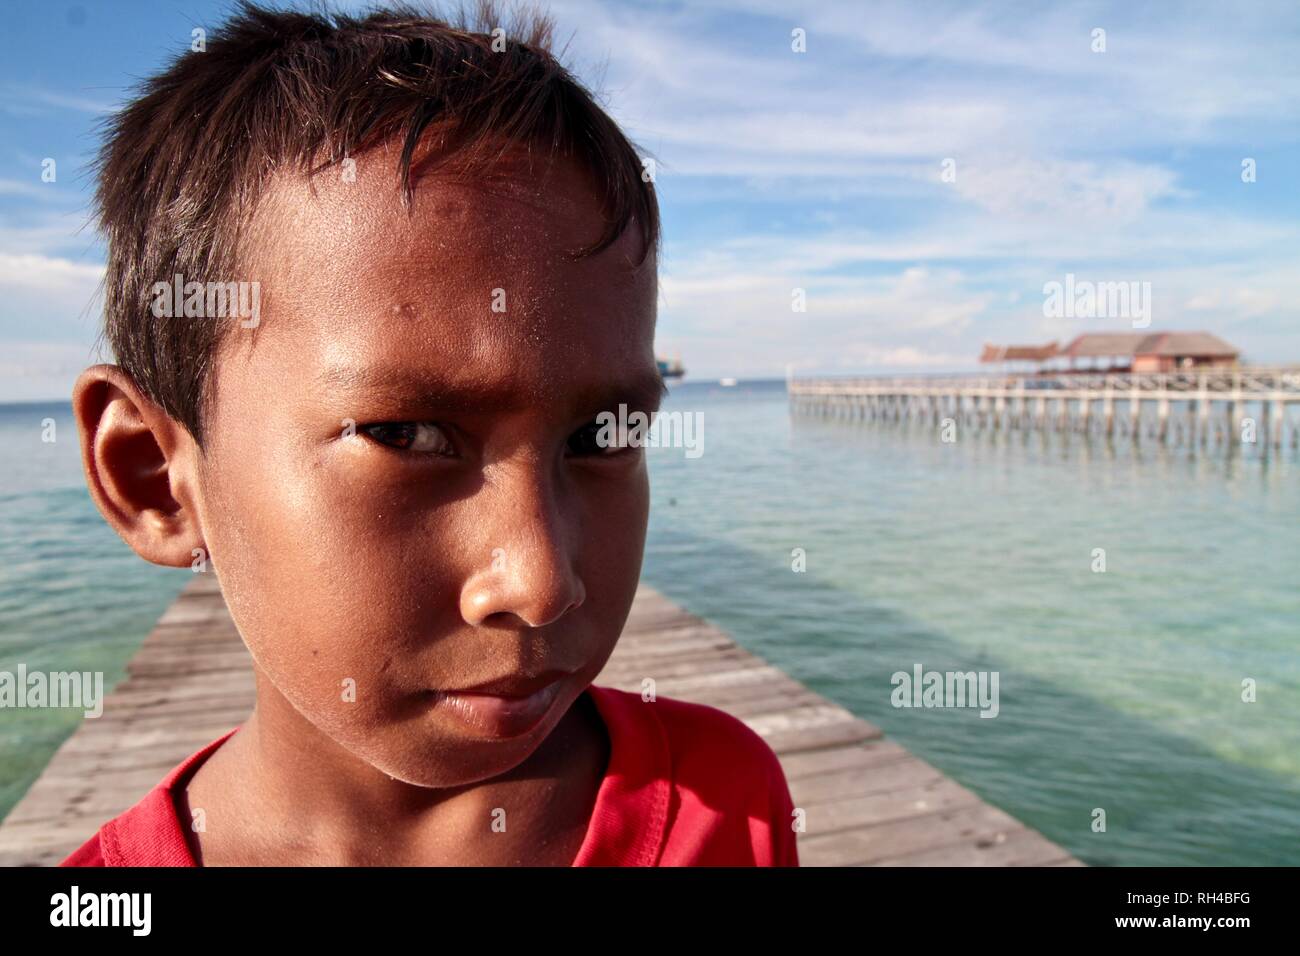 Portrait of an Indonesian boy Stock Photo